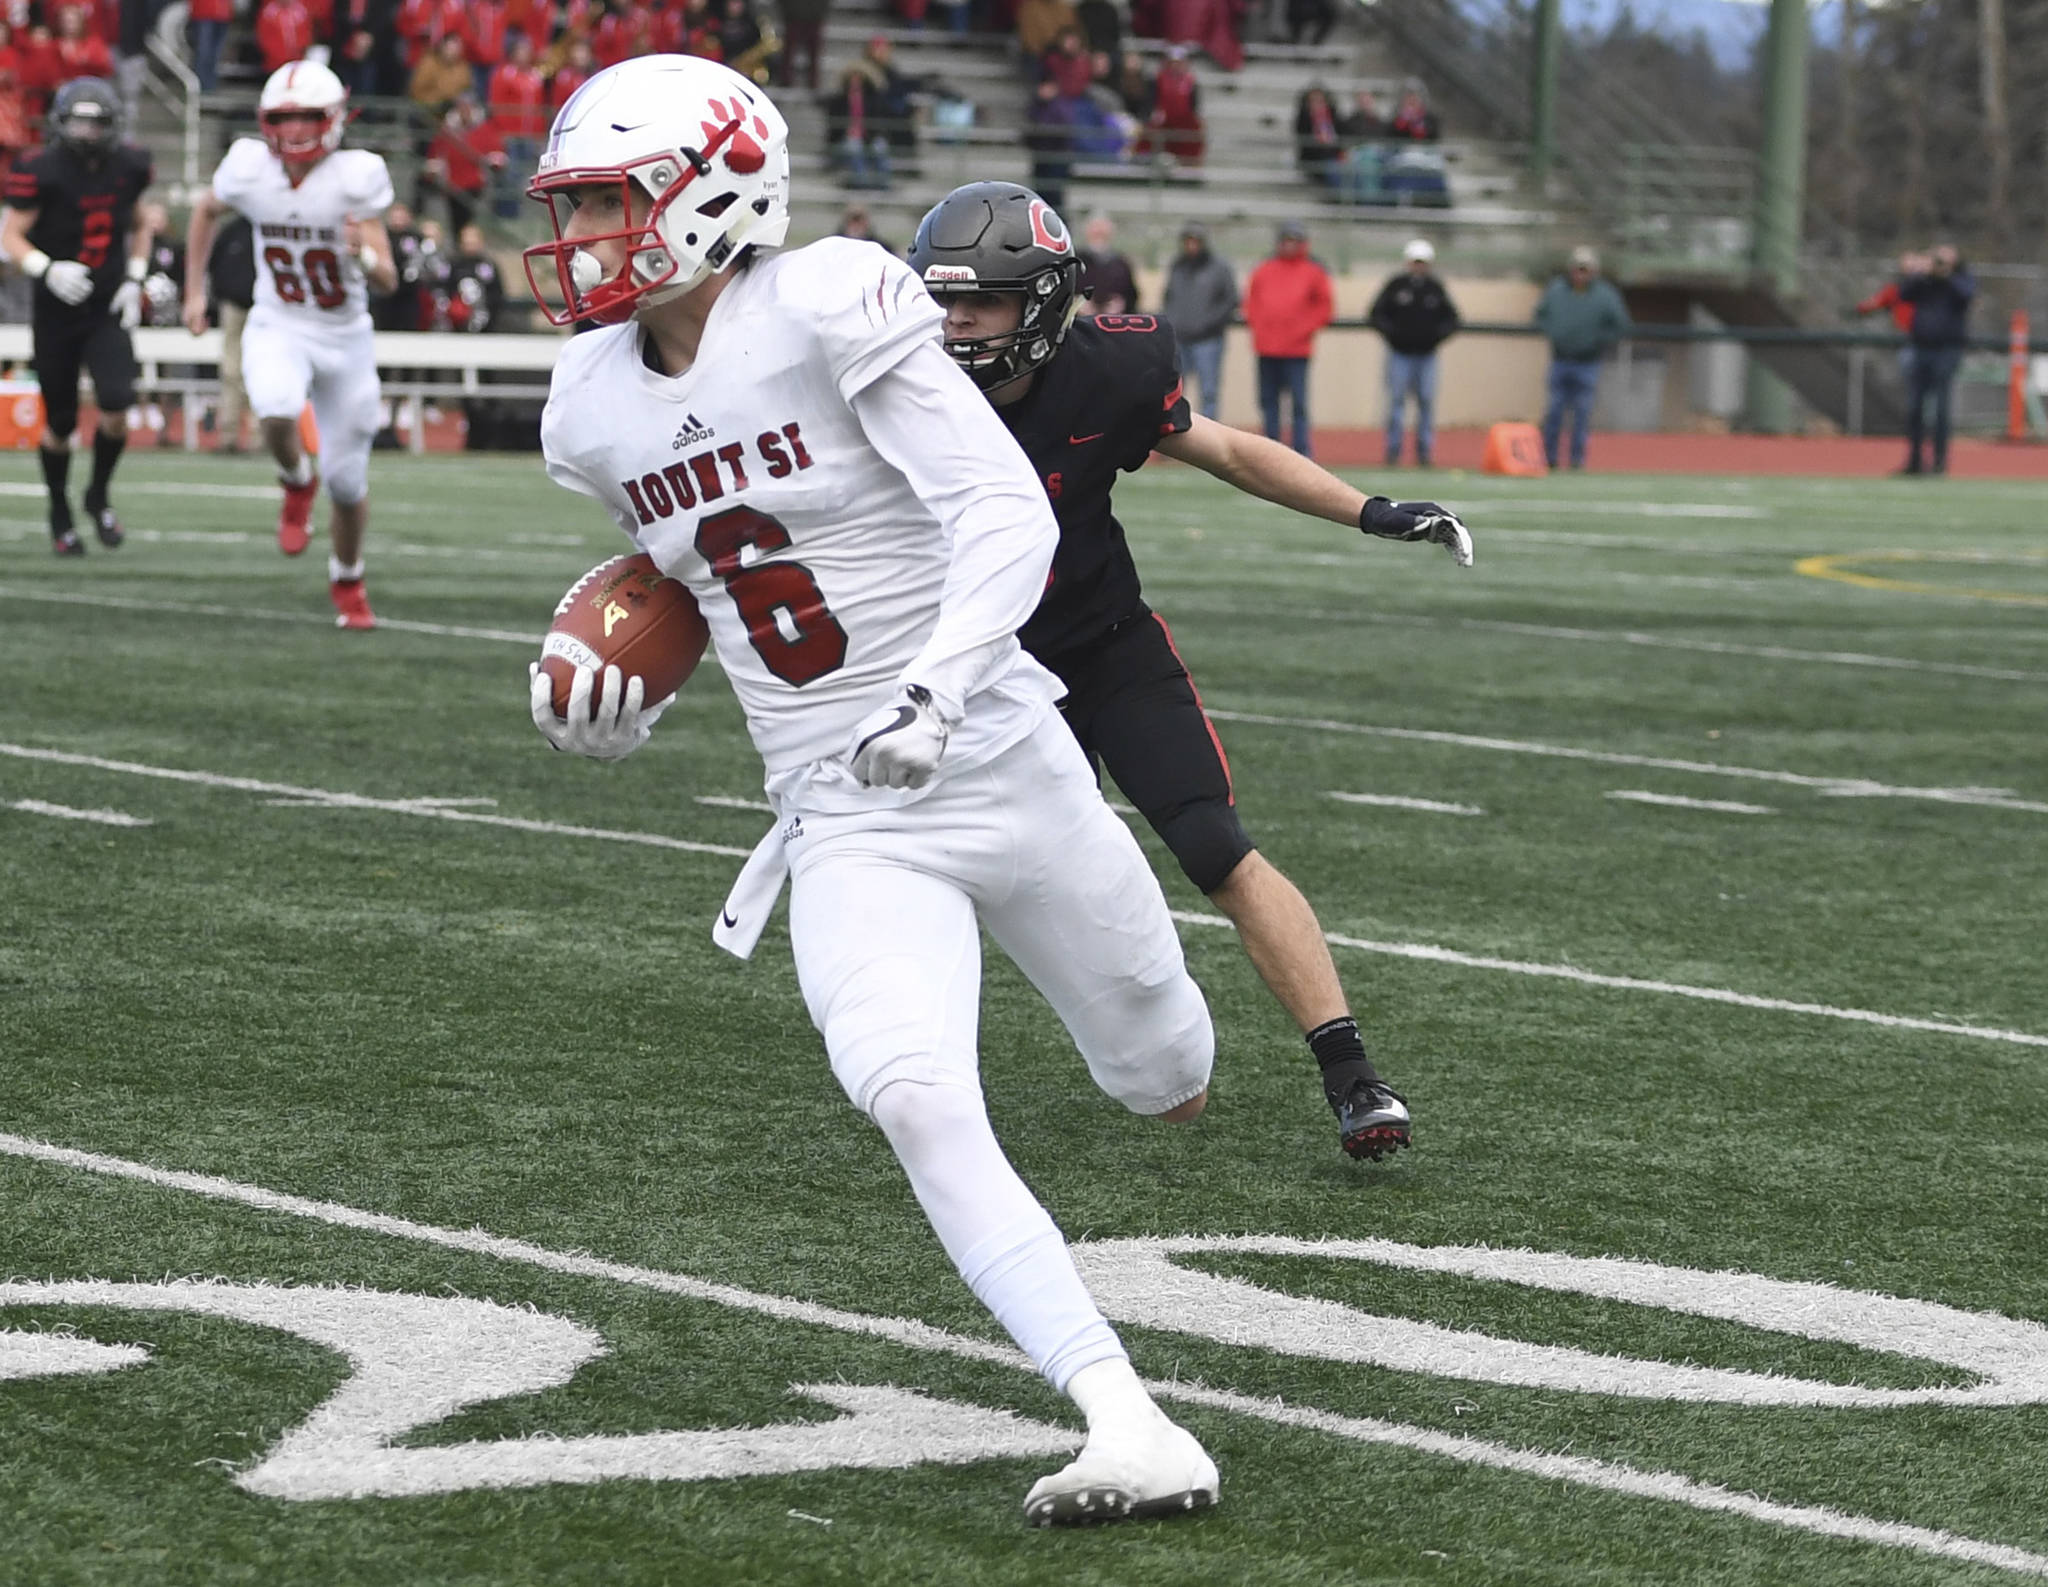 Mount Si wide receiver Brayden Holt runs for a touchdown against Camas in a 4A state semifinal on Nov. 30. Photo courtesy of Calder Productions